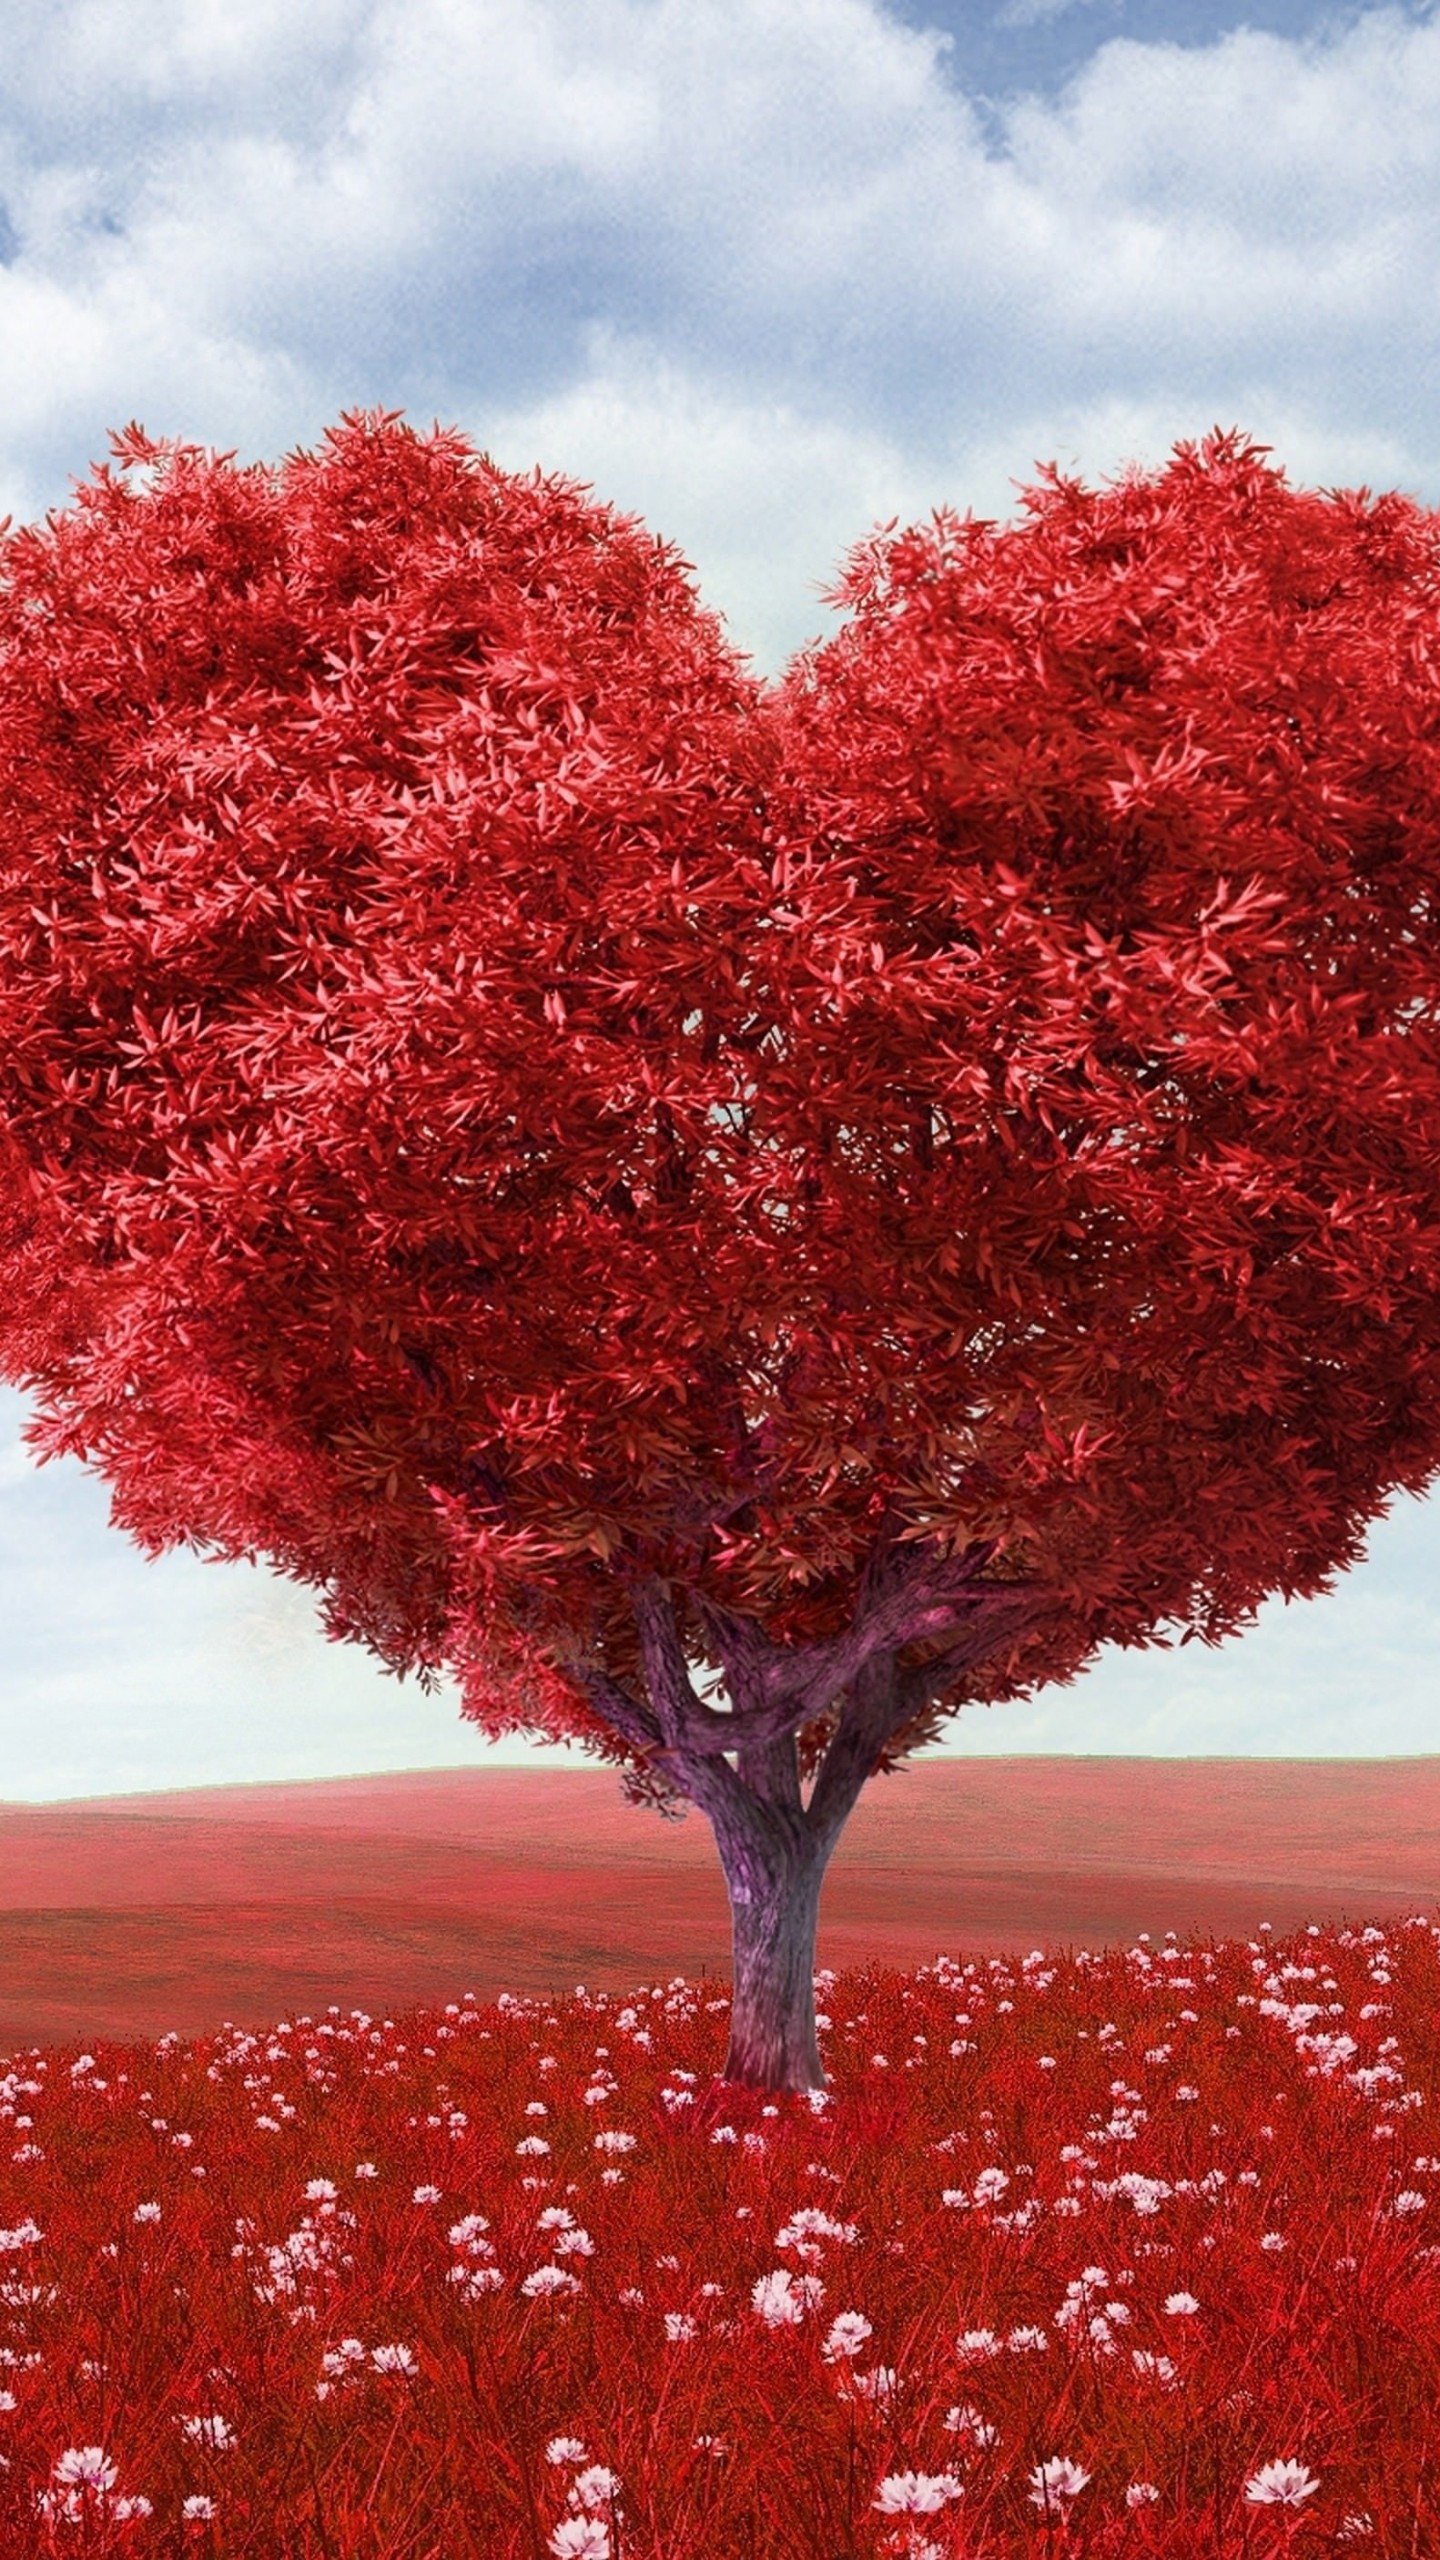 The Tree Of Love Wallpaper for SAMSUNG Galaxy Note 4